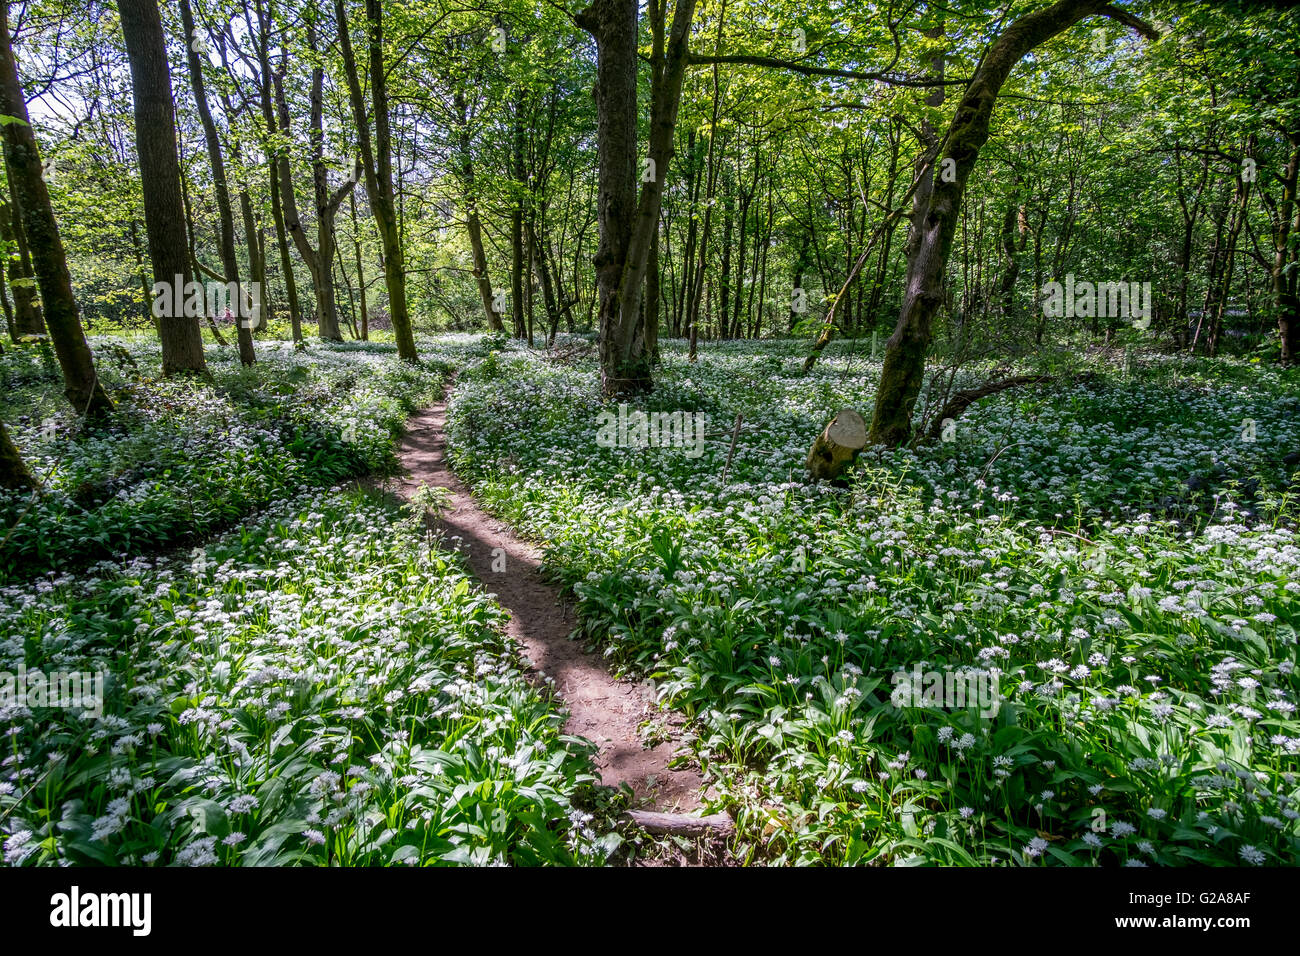 Blue Bell Wood in full bloom with Wild garlic flowers with a footpath leading you into the image Stock Photo